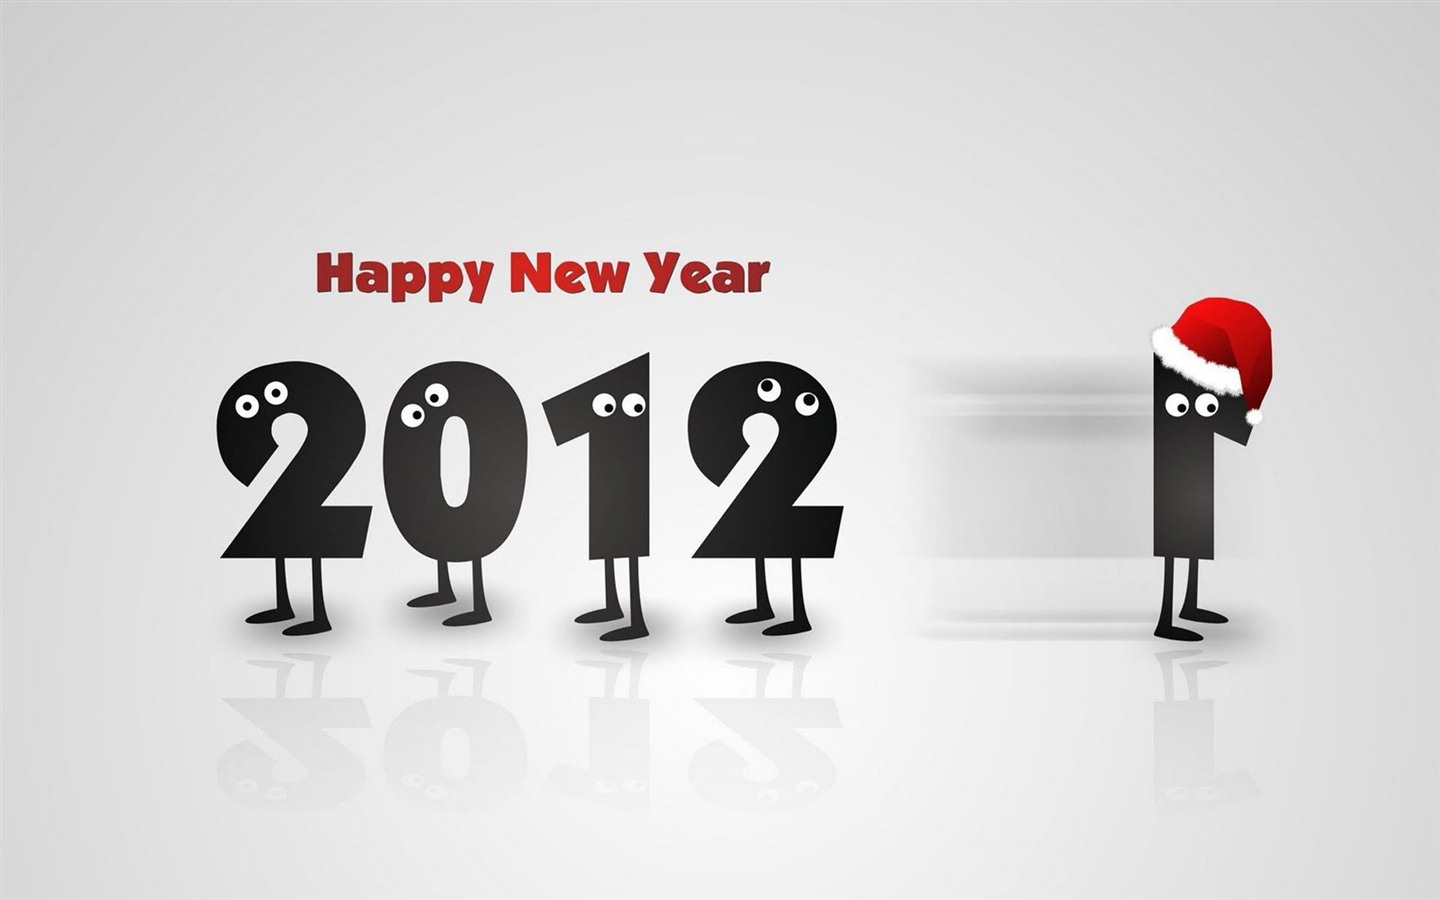 2012 New Year wallpapers (2) #19 - 1440x900